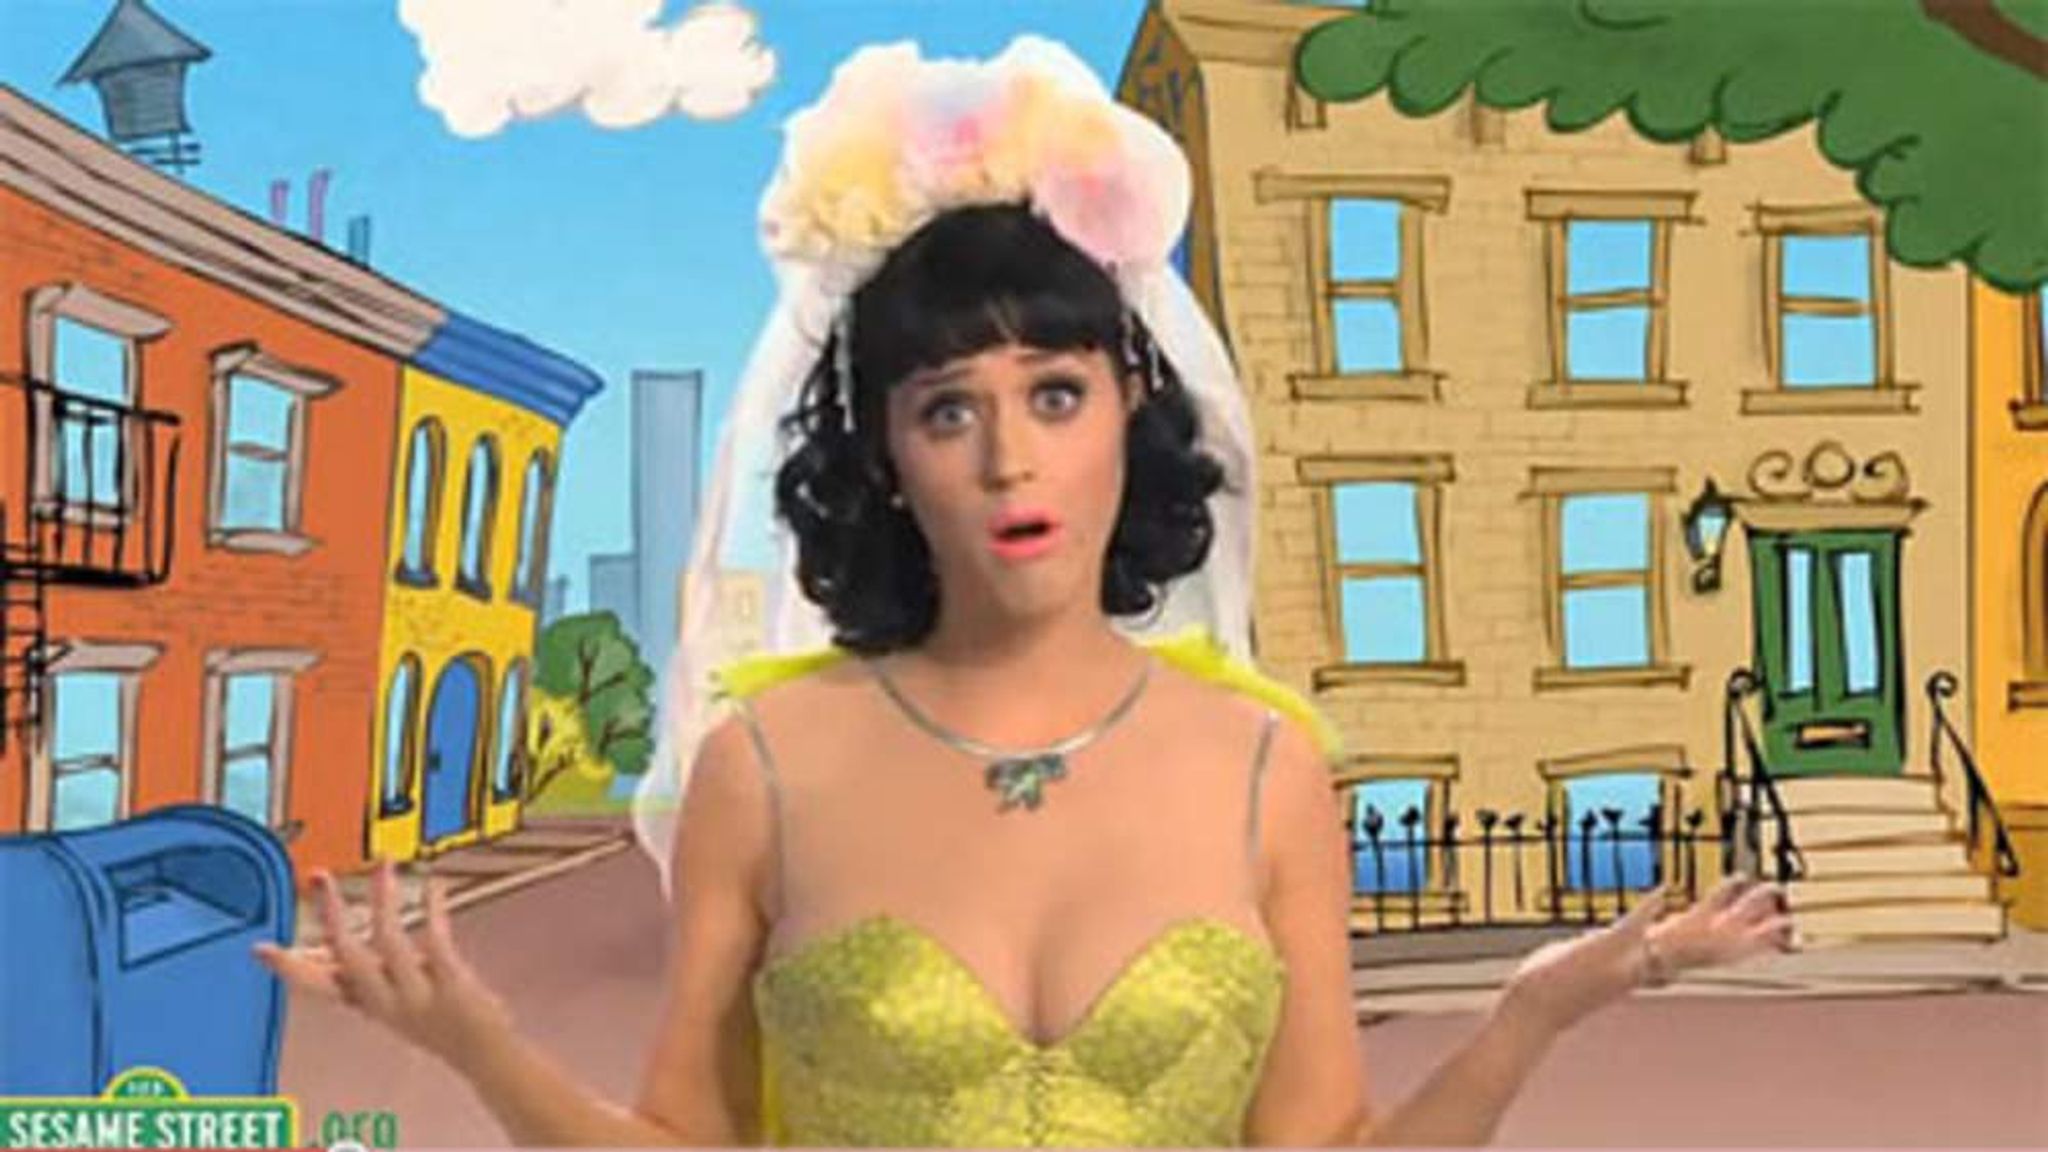 Sesame Street Hot N Cold For Katy Perry Ents And Arts News Sky News 